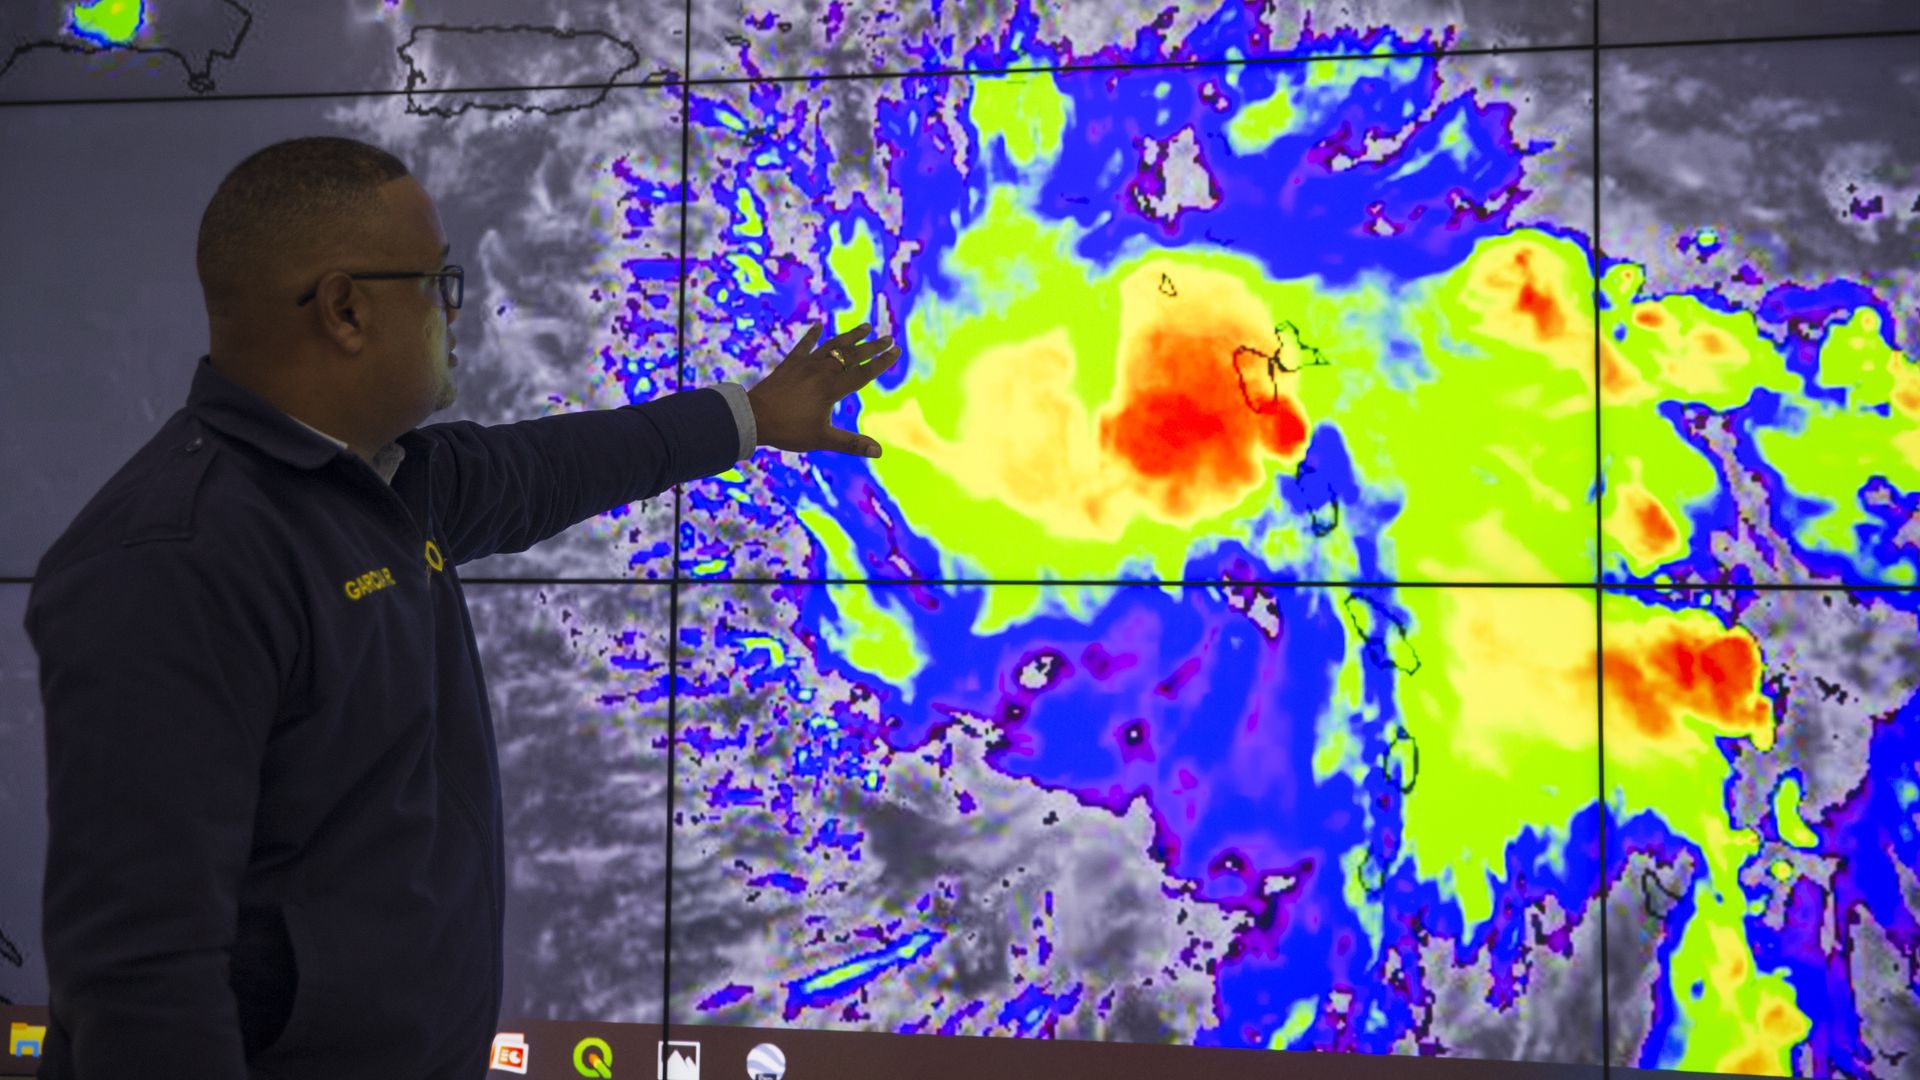 In this image, a man outstretches a hand towards a weather map that shows a tropical storm in different colors